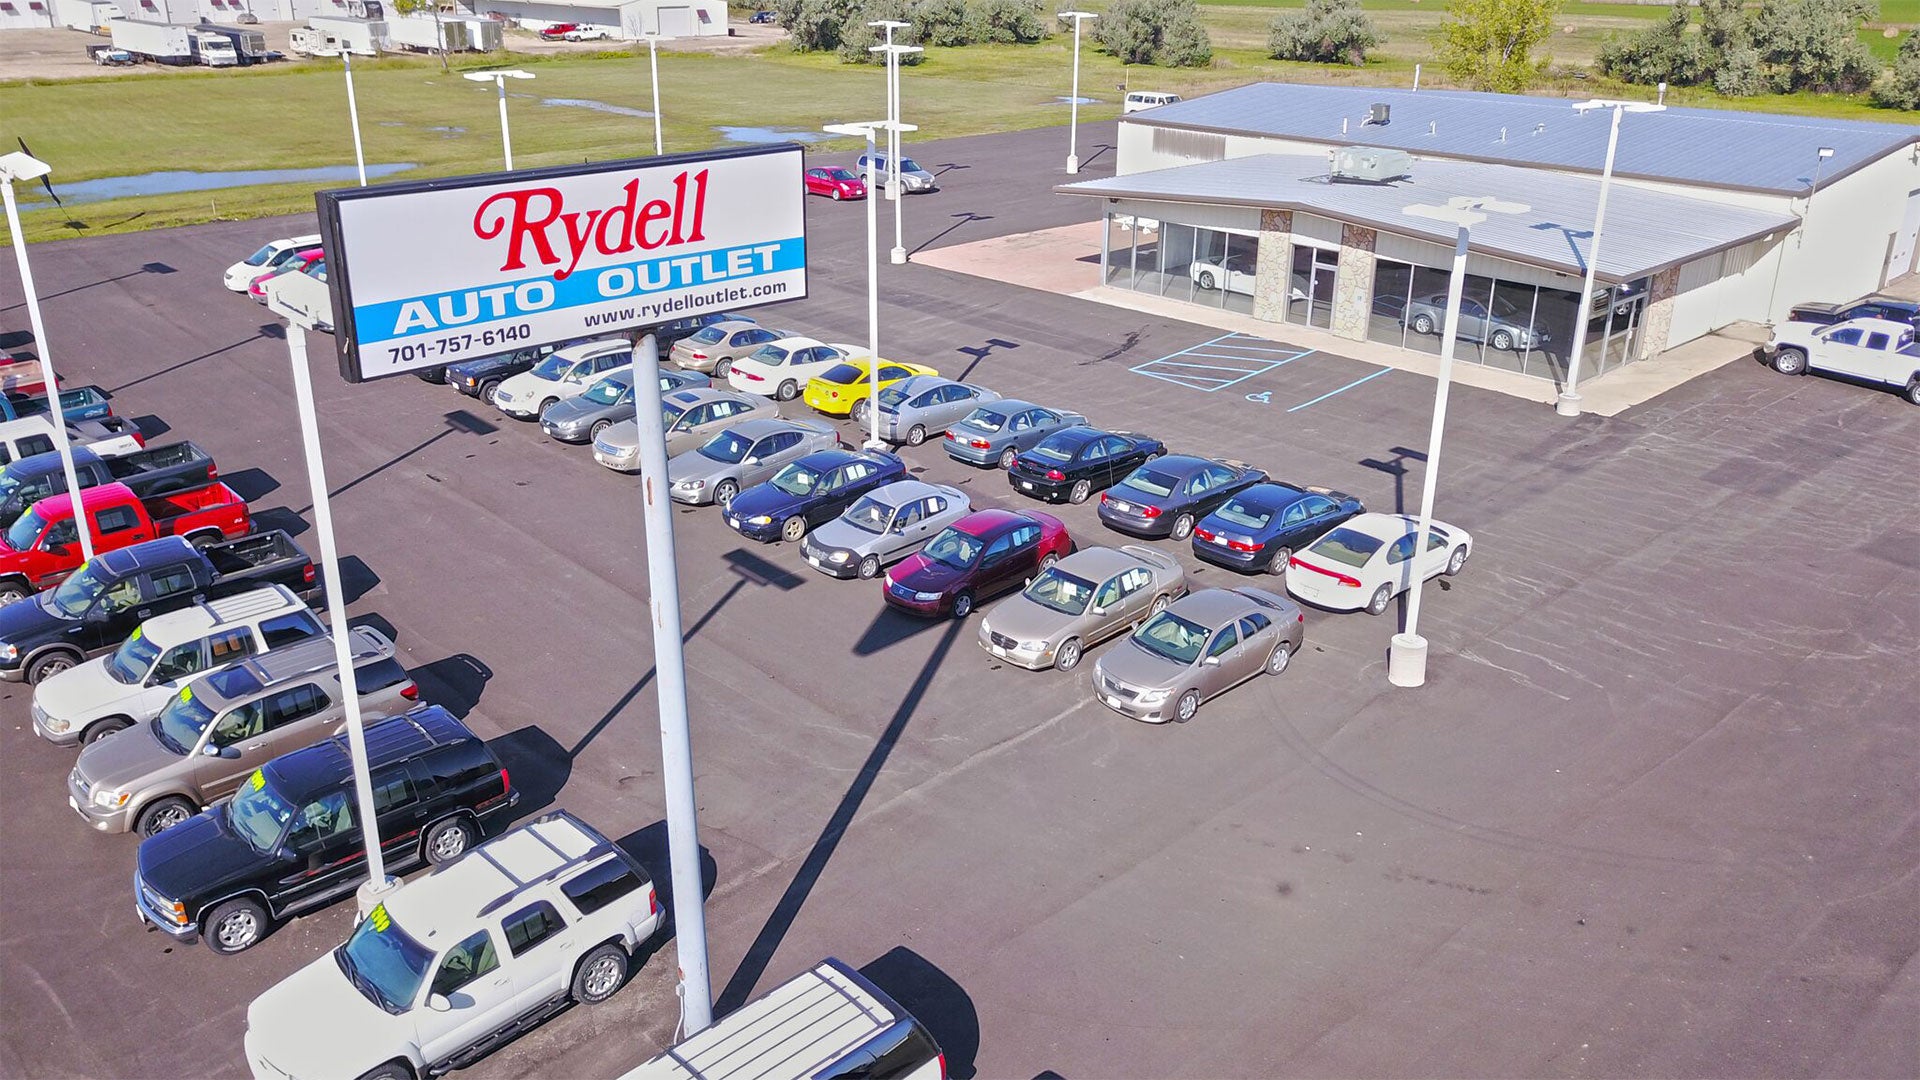 The used car lot at Rydell Outlet, serving Grafton